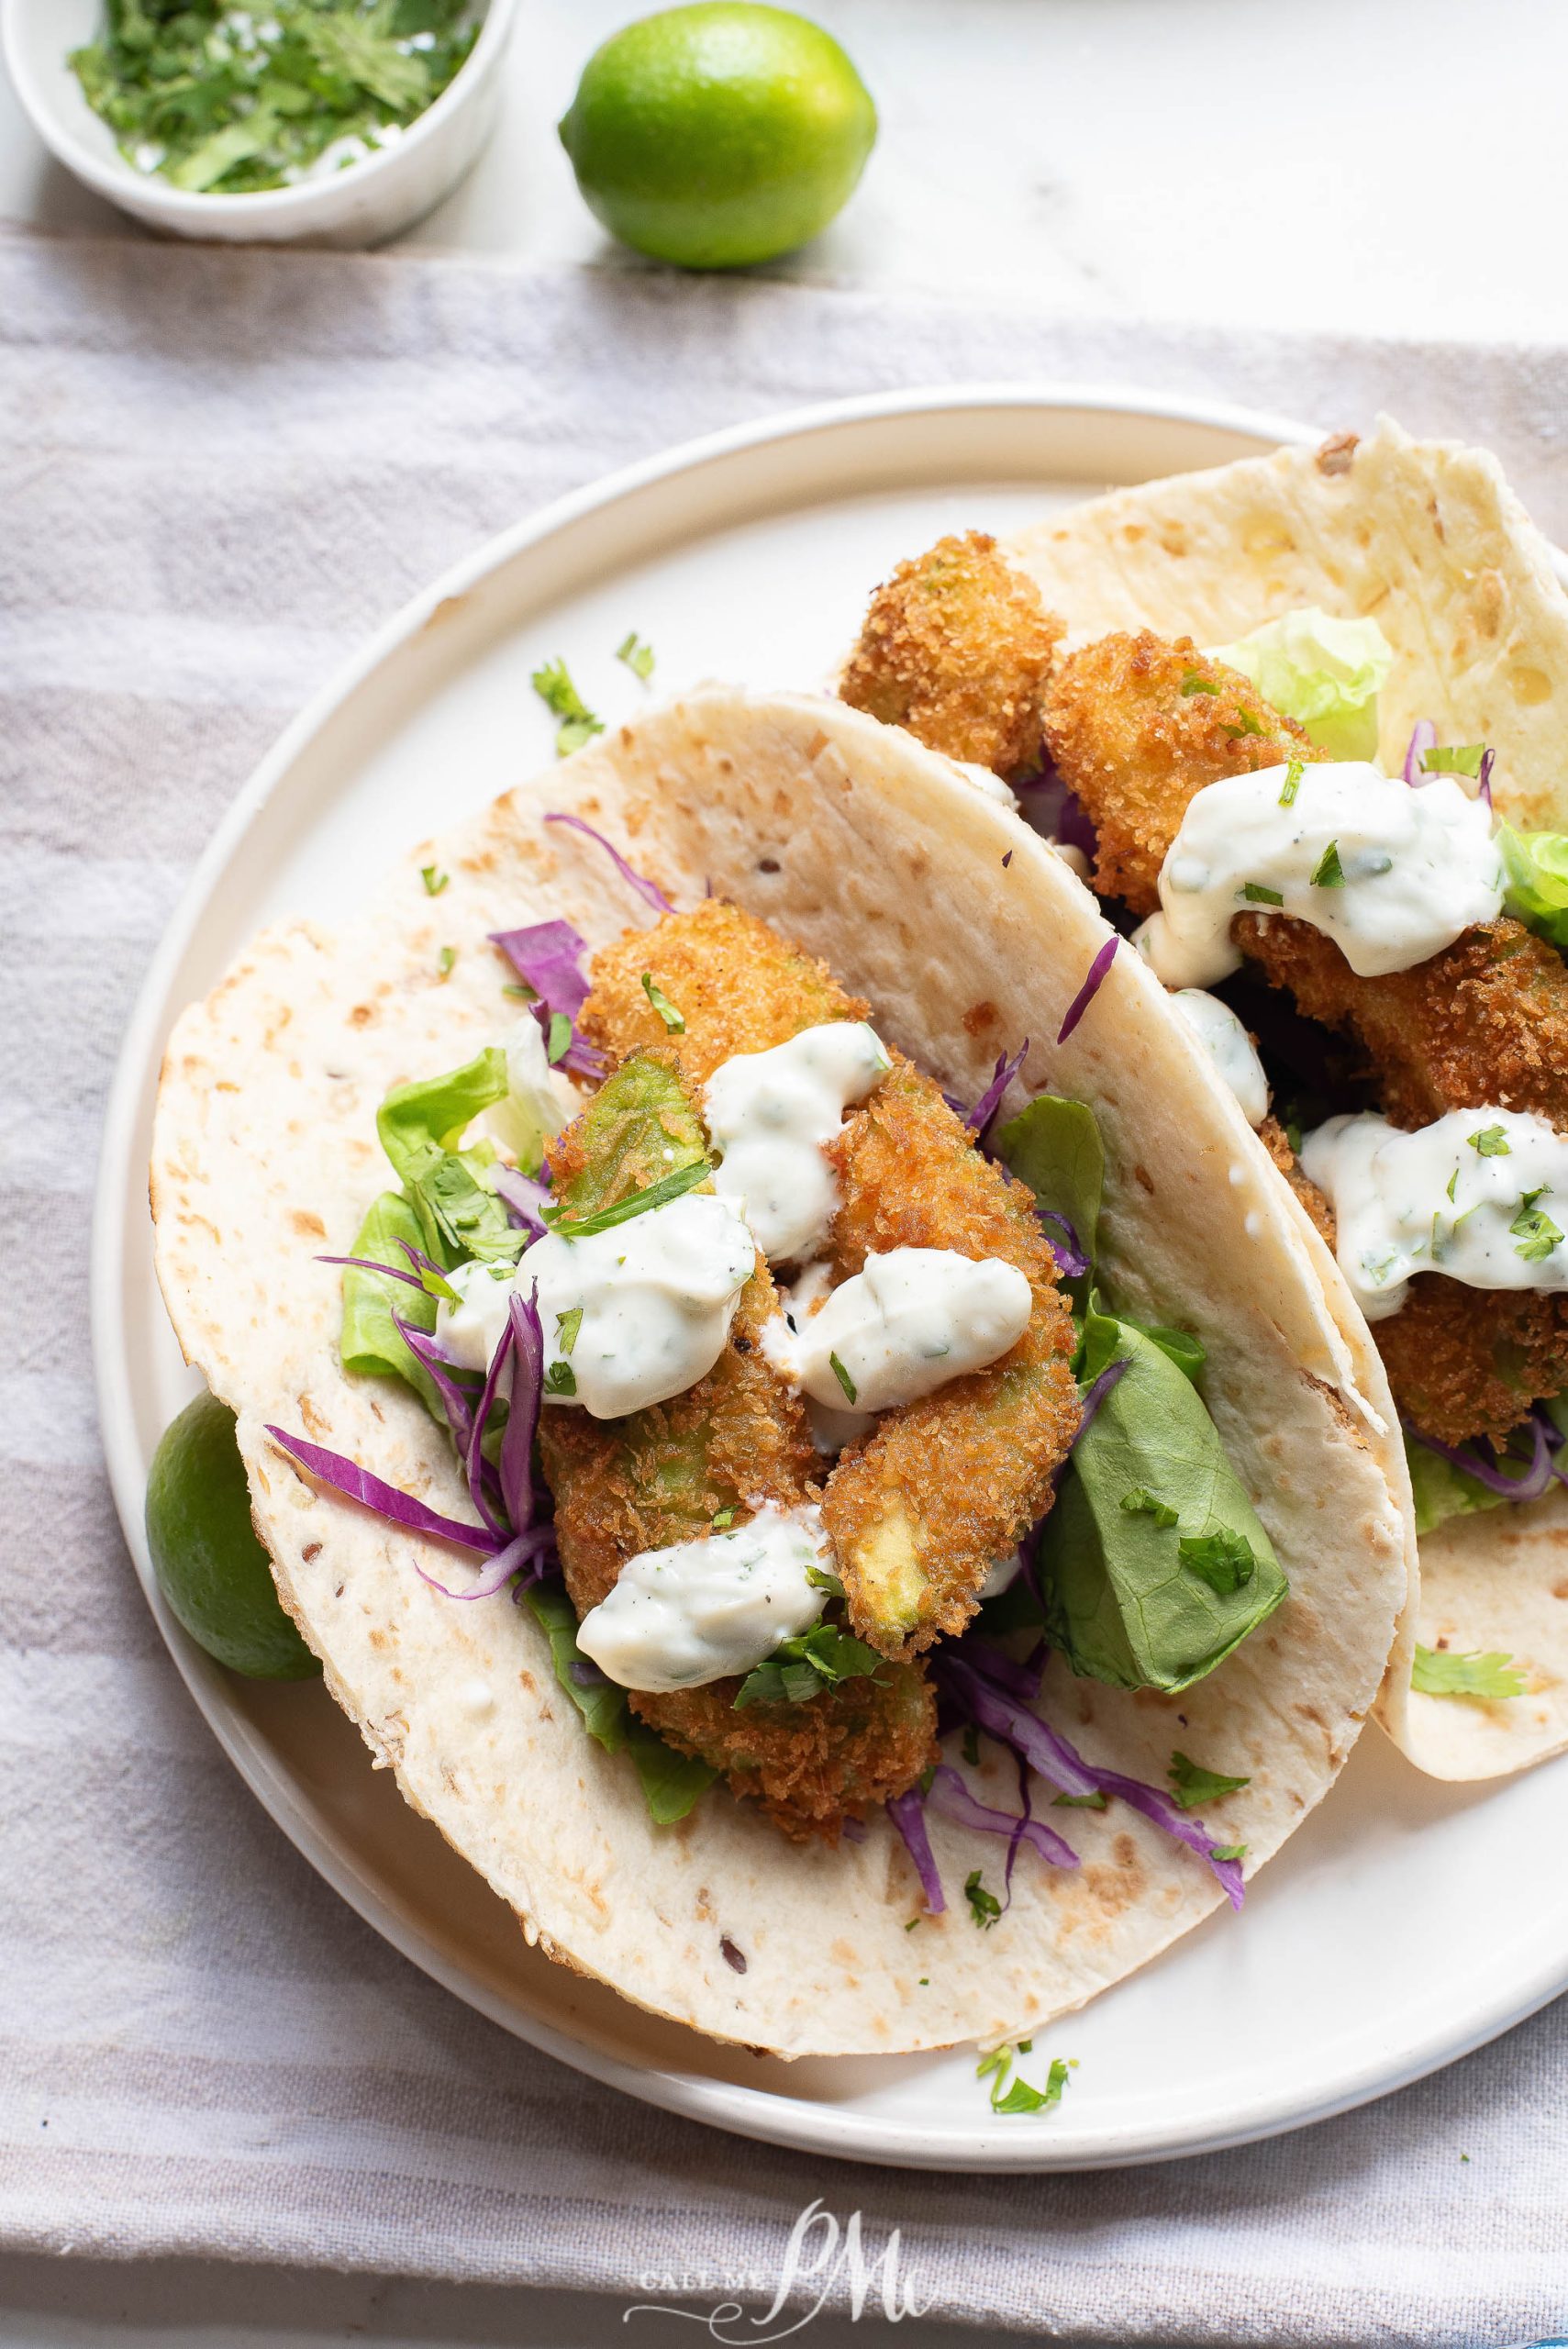 Two Oven-fried avocado tacos on a white plate.